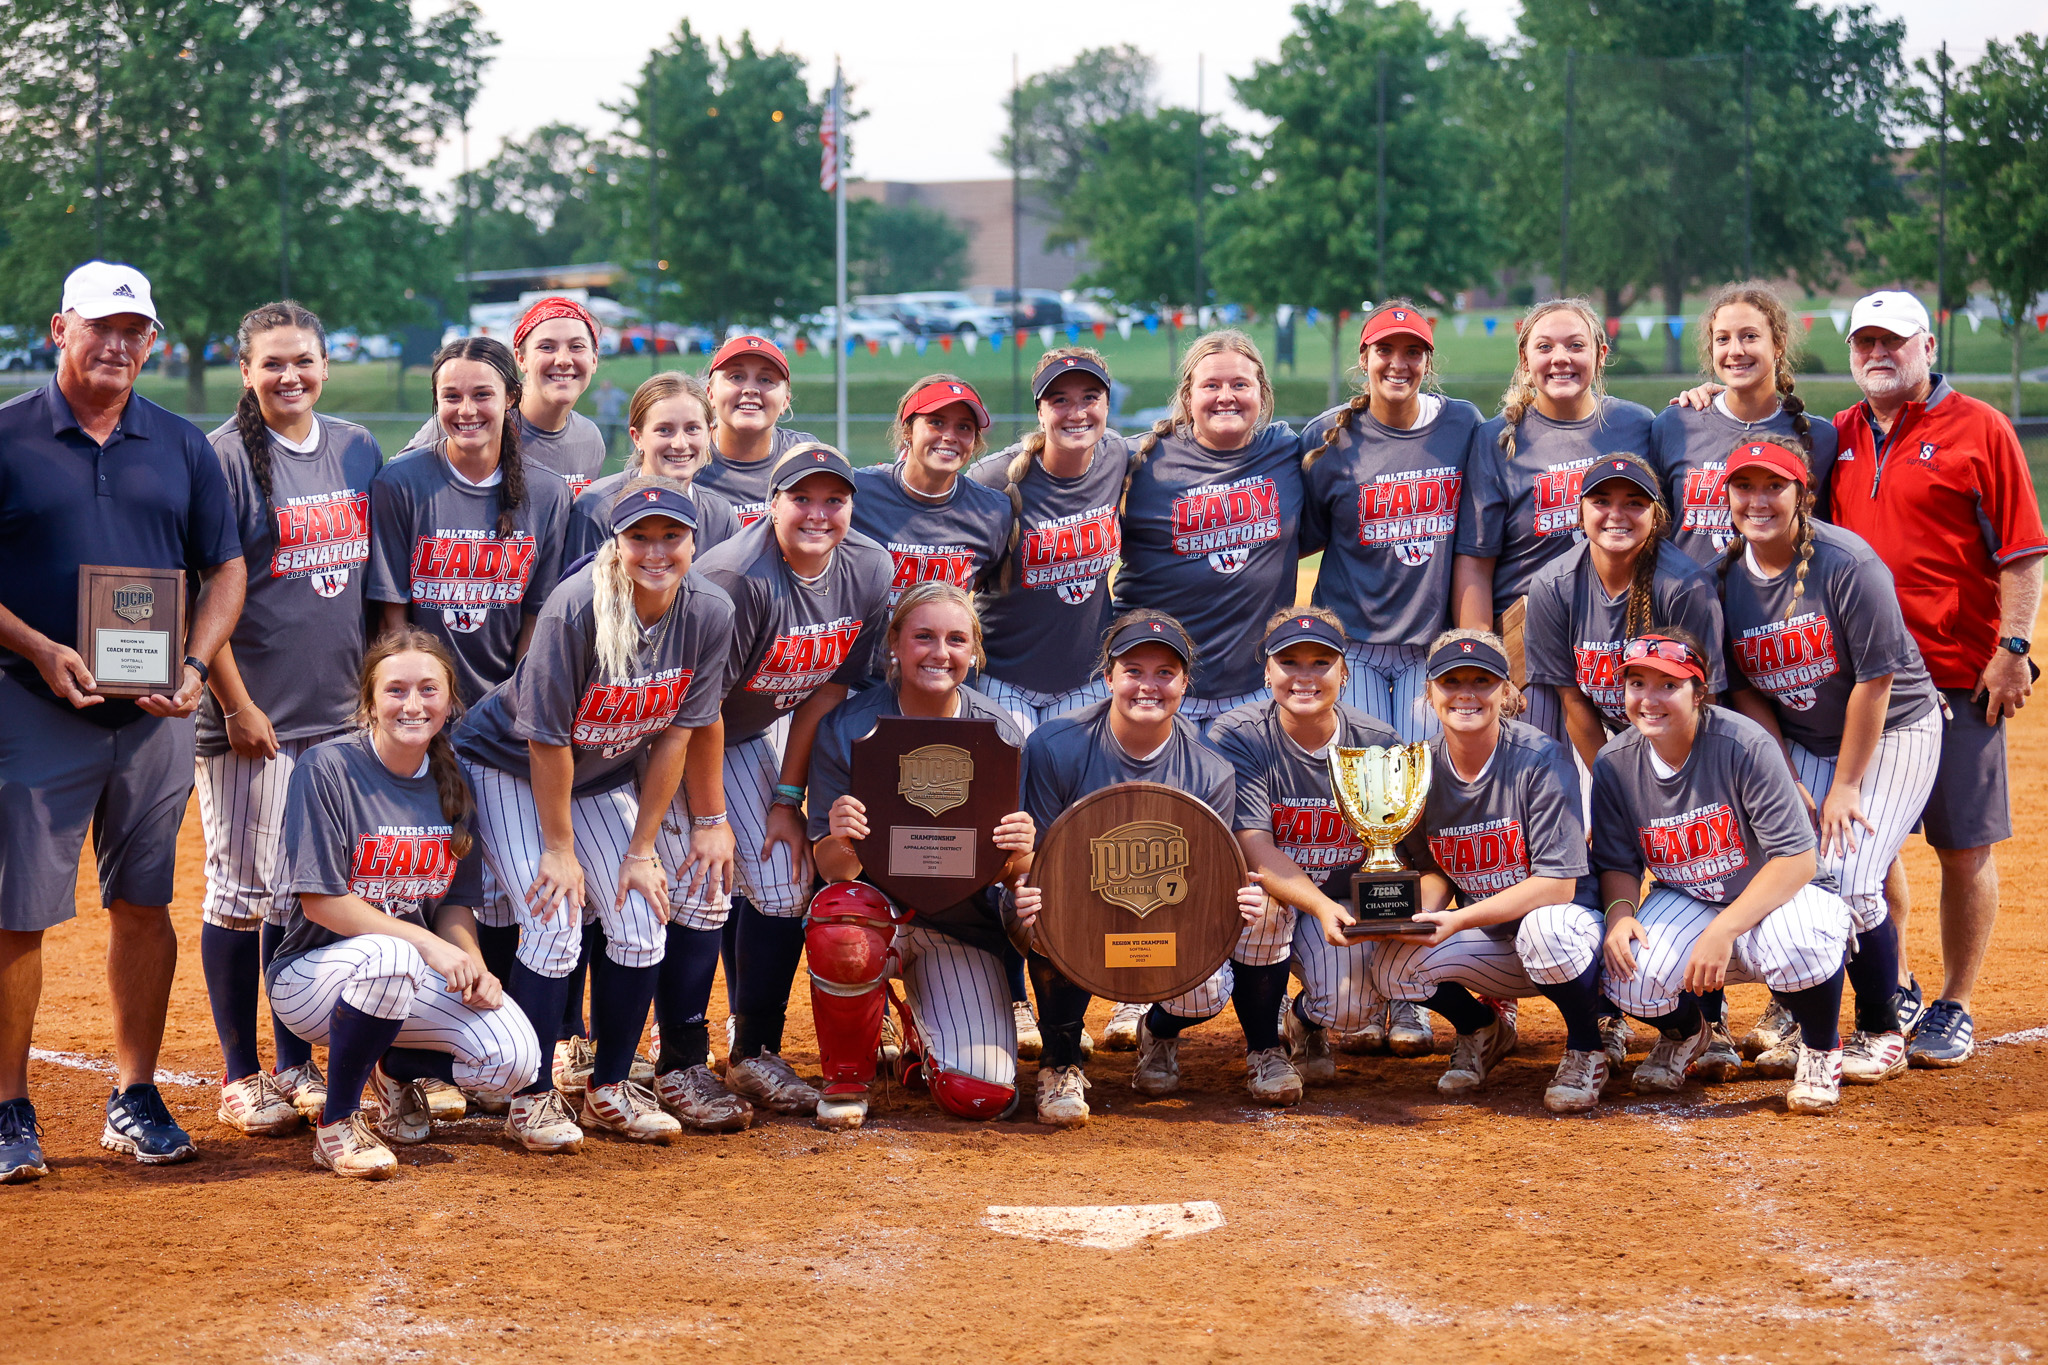 No. 4 Walters State wins Region 7/TCCAA Championship, punches ticket to NJCAA DI Softball World Series